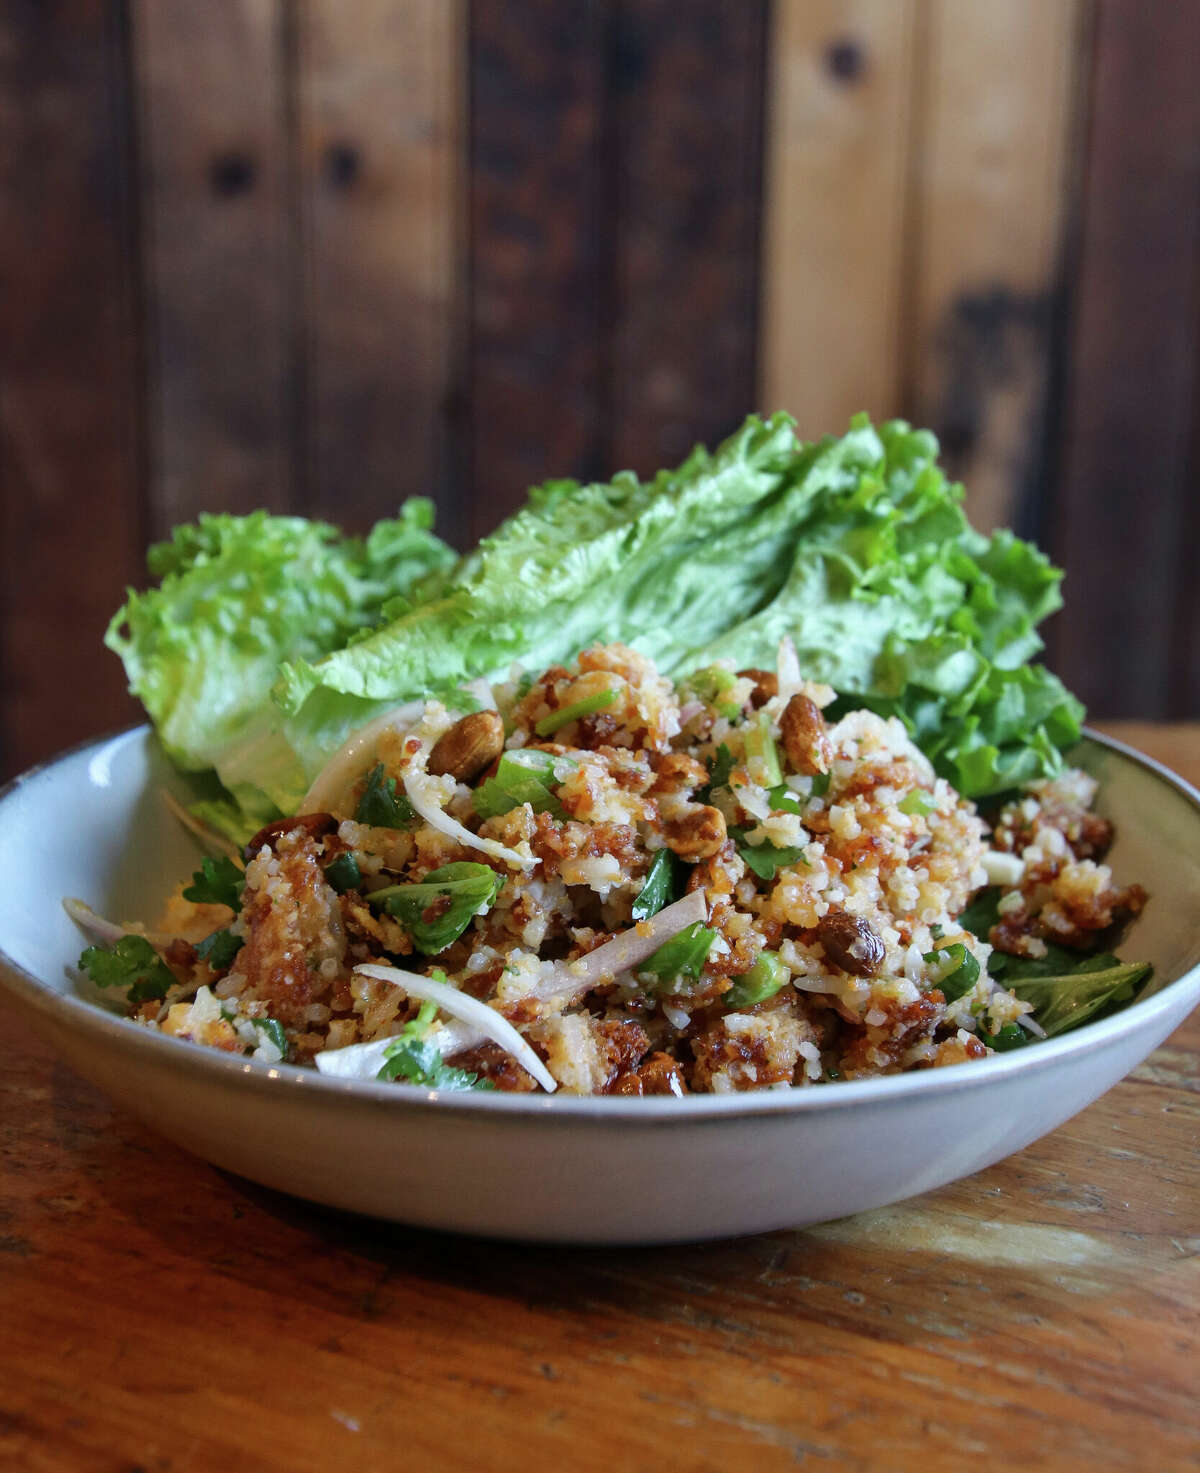 On the menu at Haan Lao at Bound by Fate in Schuylerville is naem khao, lettuce wraps with crispy coconut rice, fish sauce-lime dressing, peanuts and herbs.